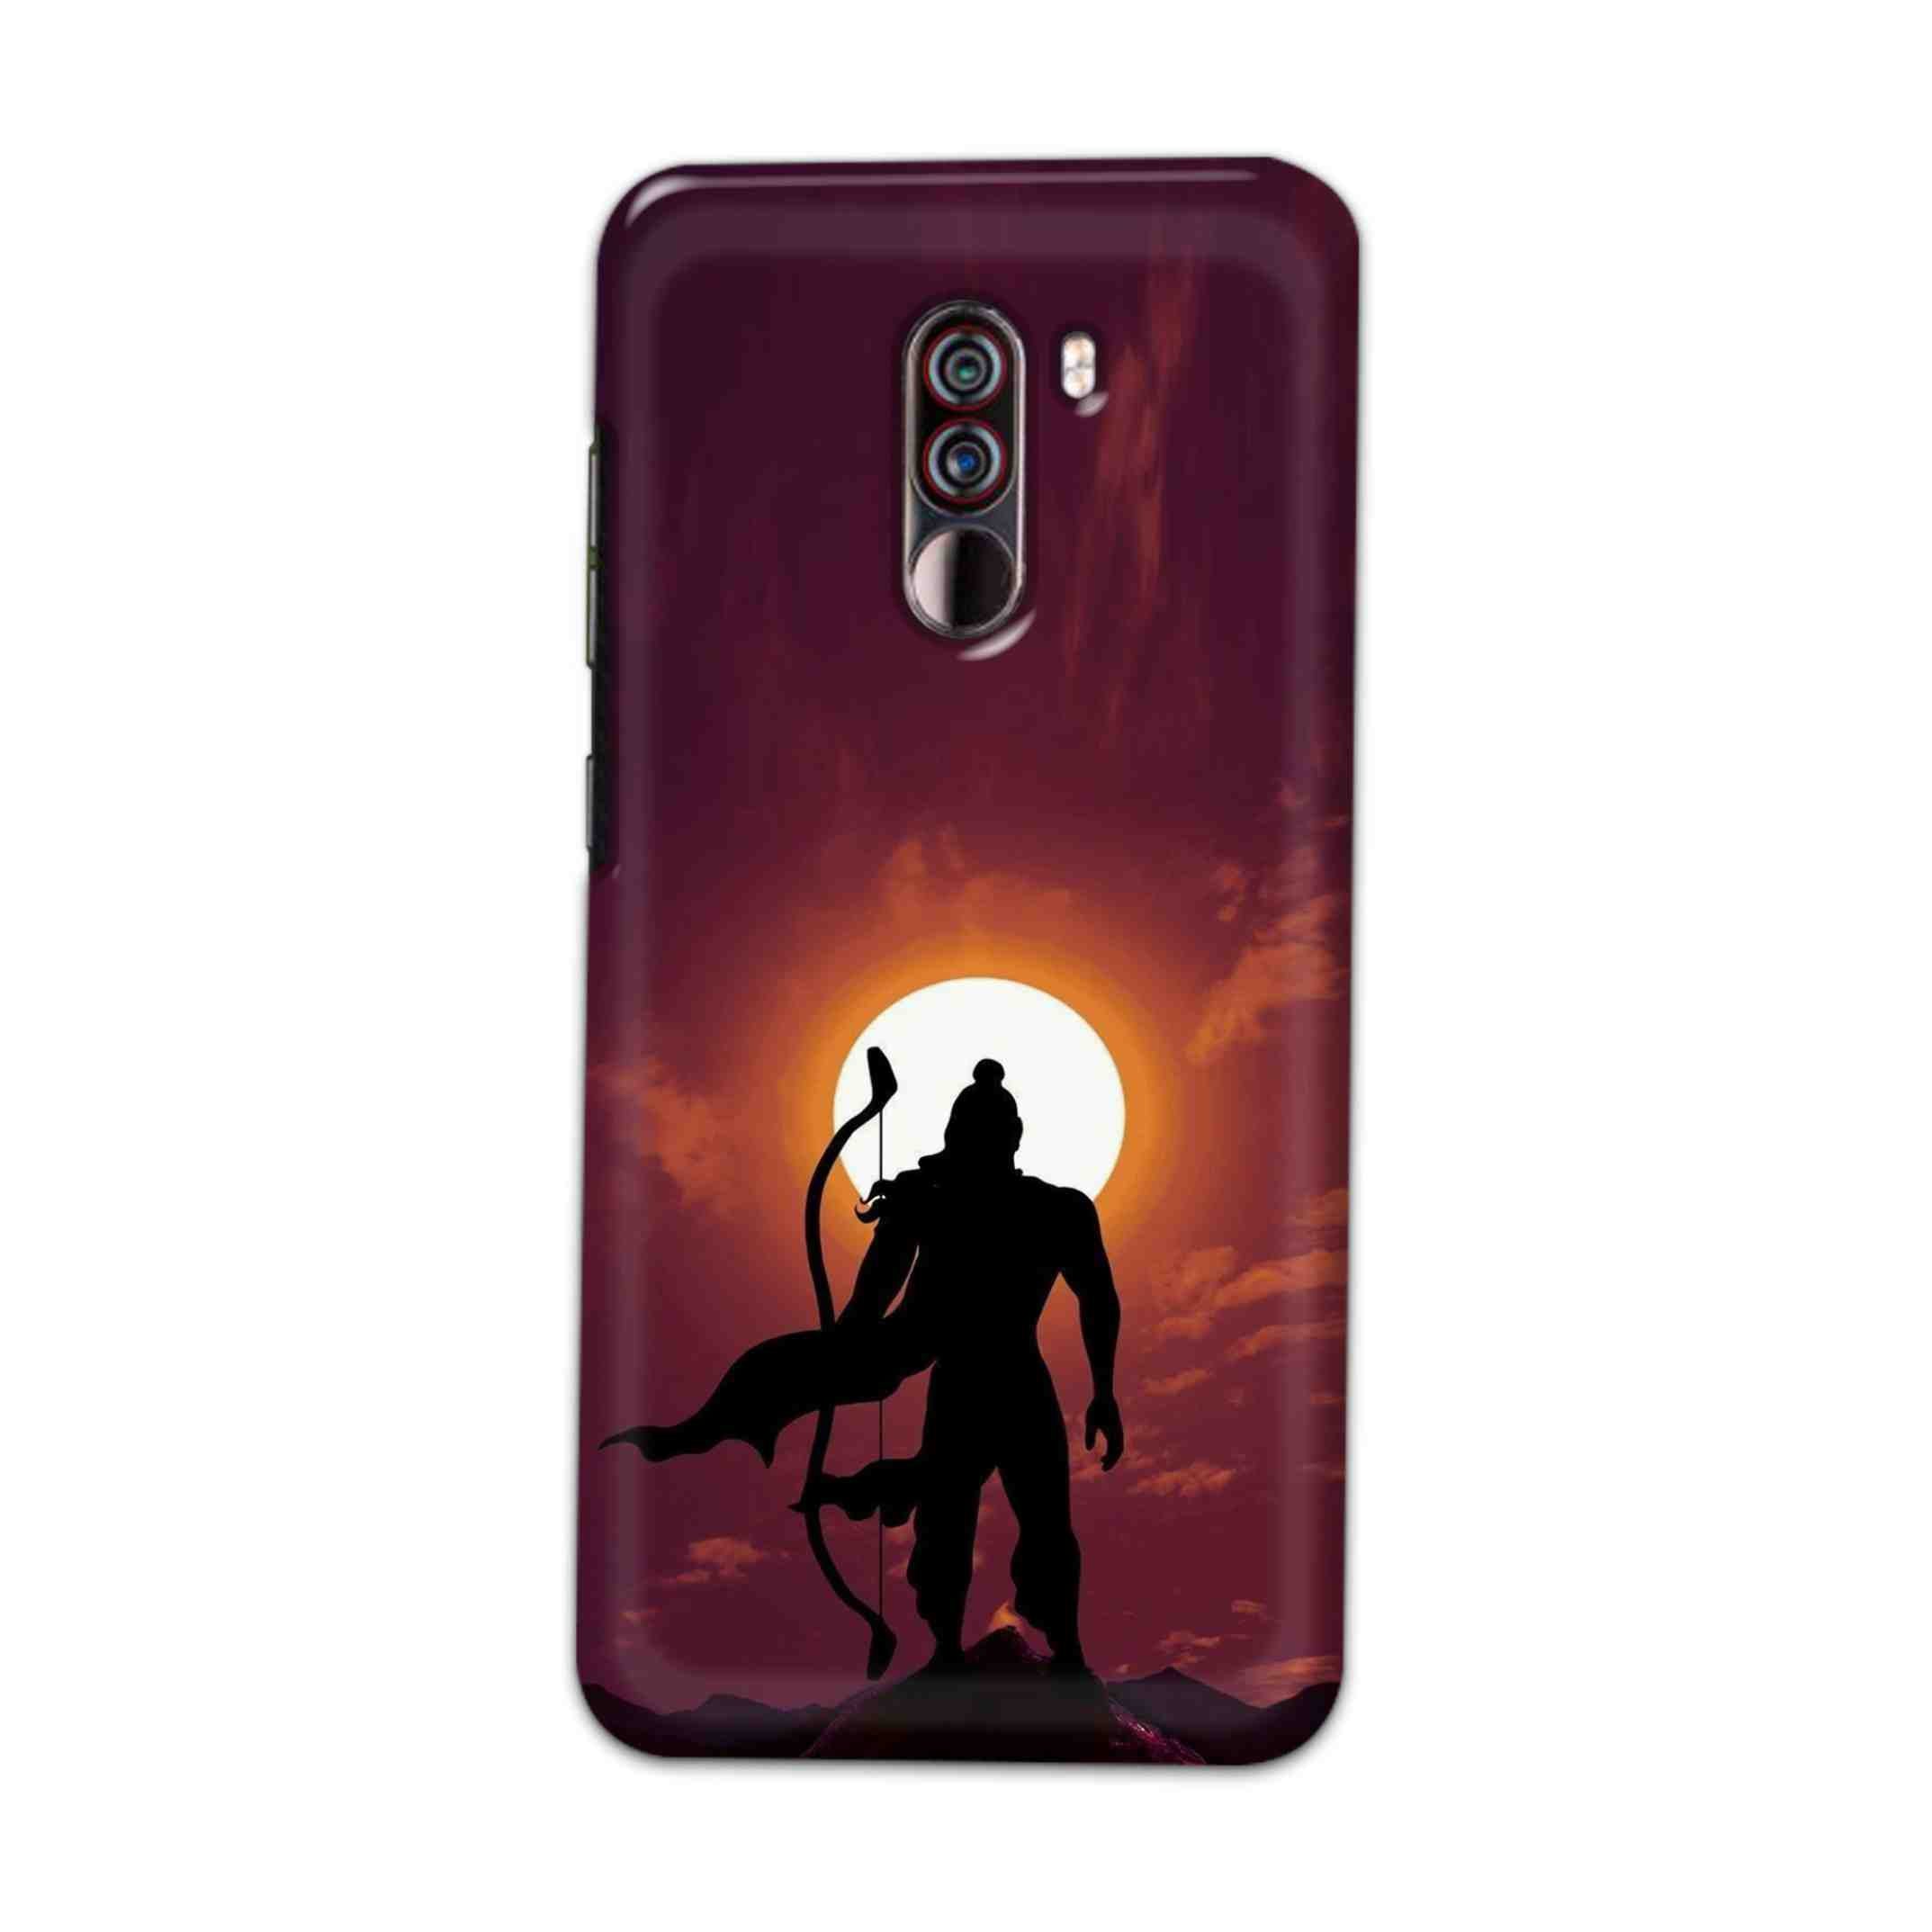 Buy Ram Hard Back Mobile Phone Case Cover For Xiaomi Pocophone F1 Online